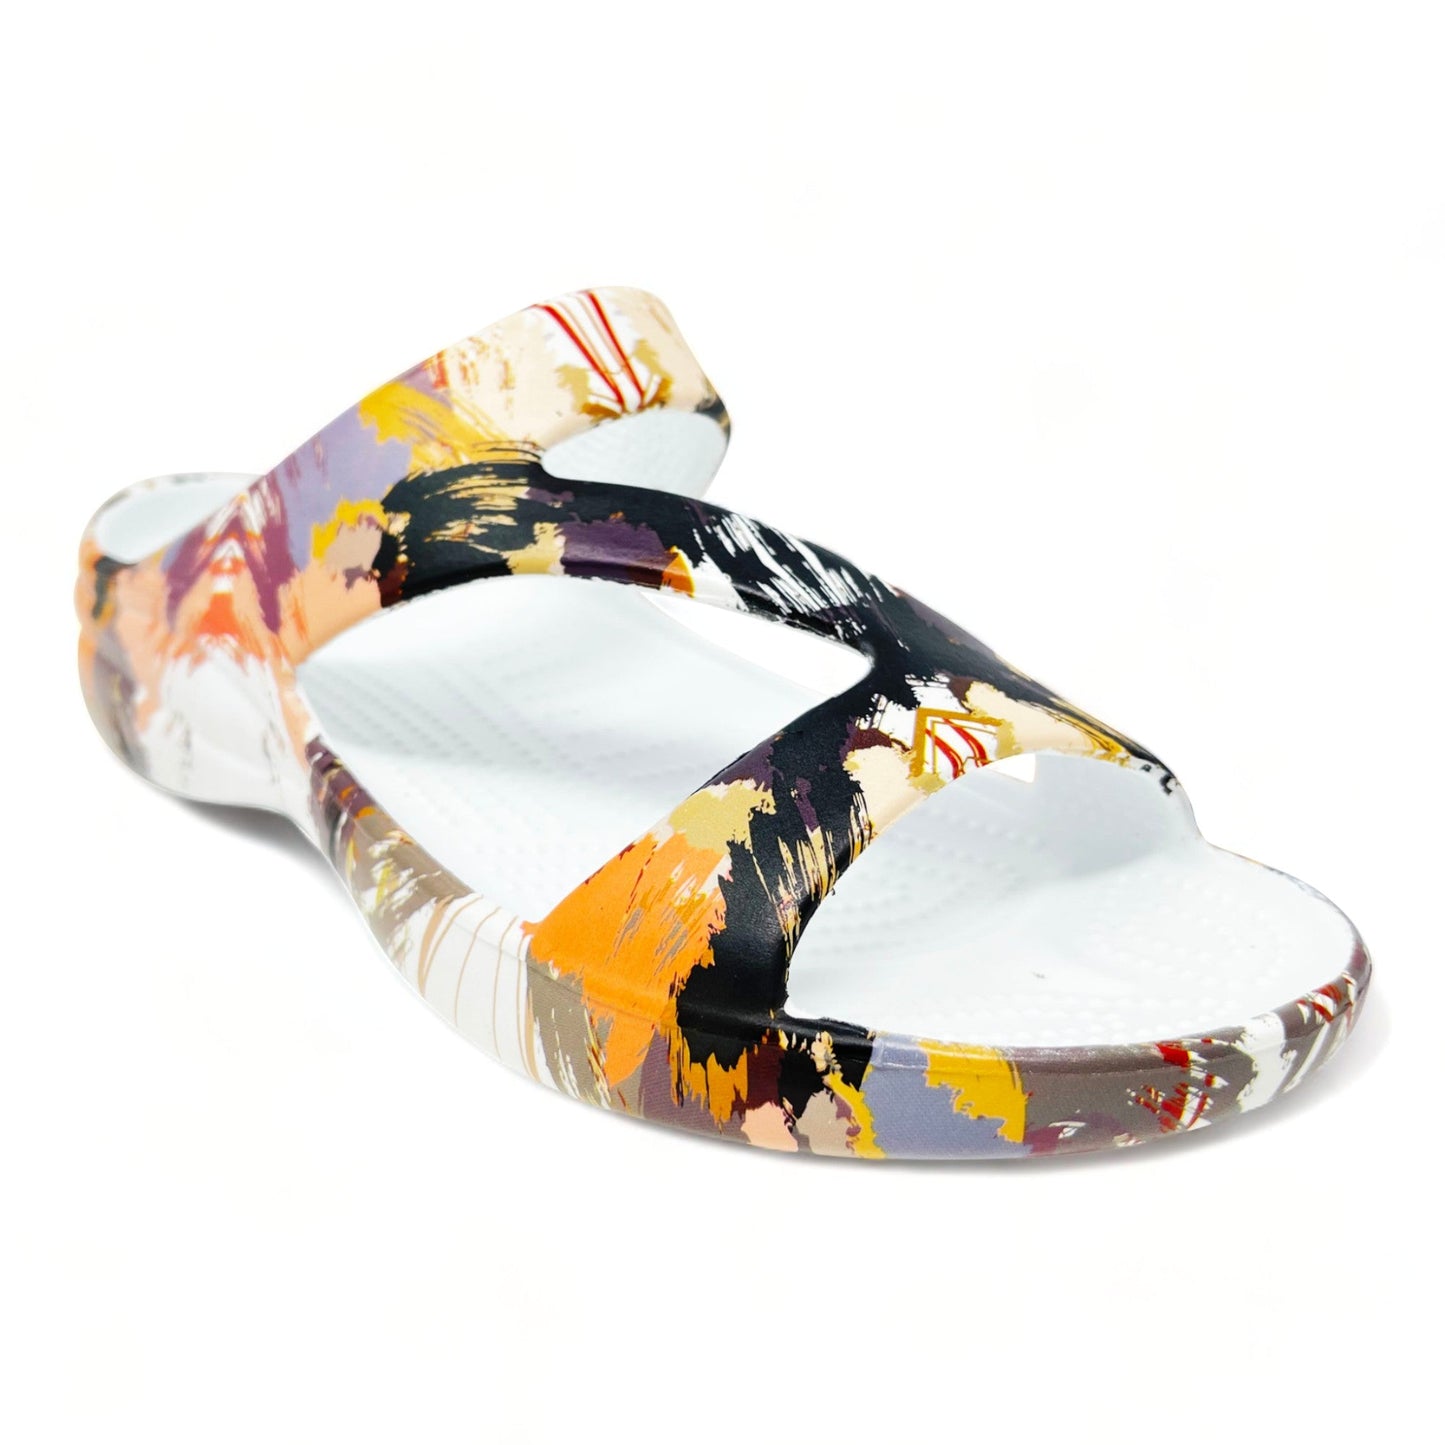 Women's PAW Print Z Sandals - Rare Earth by DAWGS USA